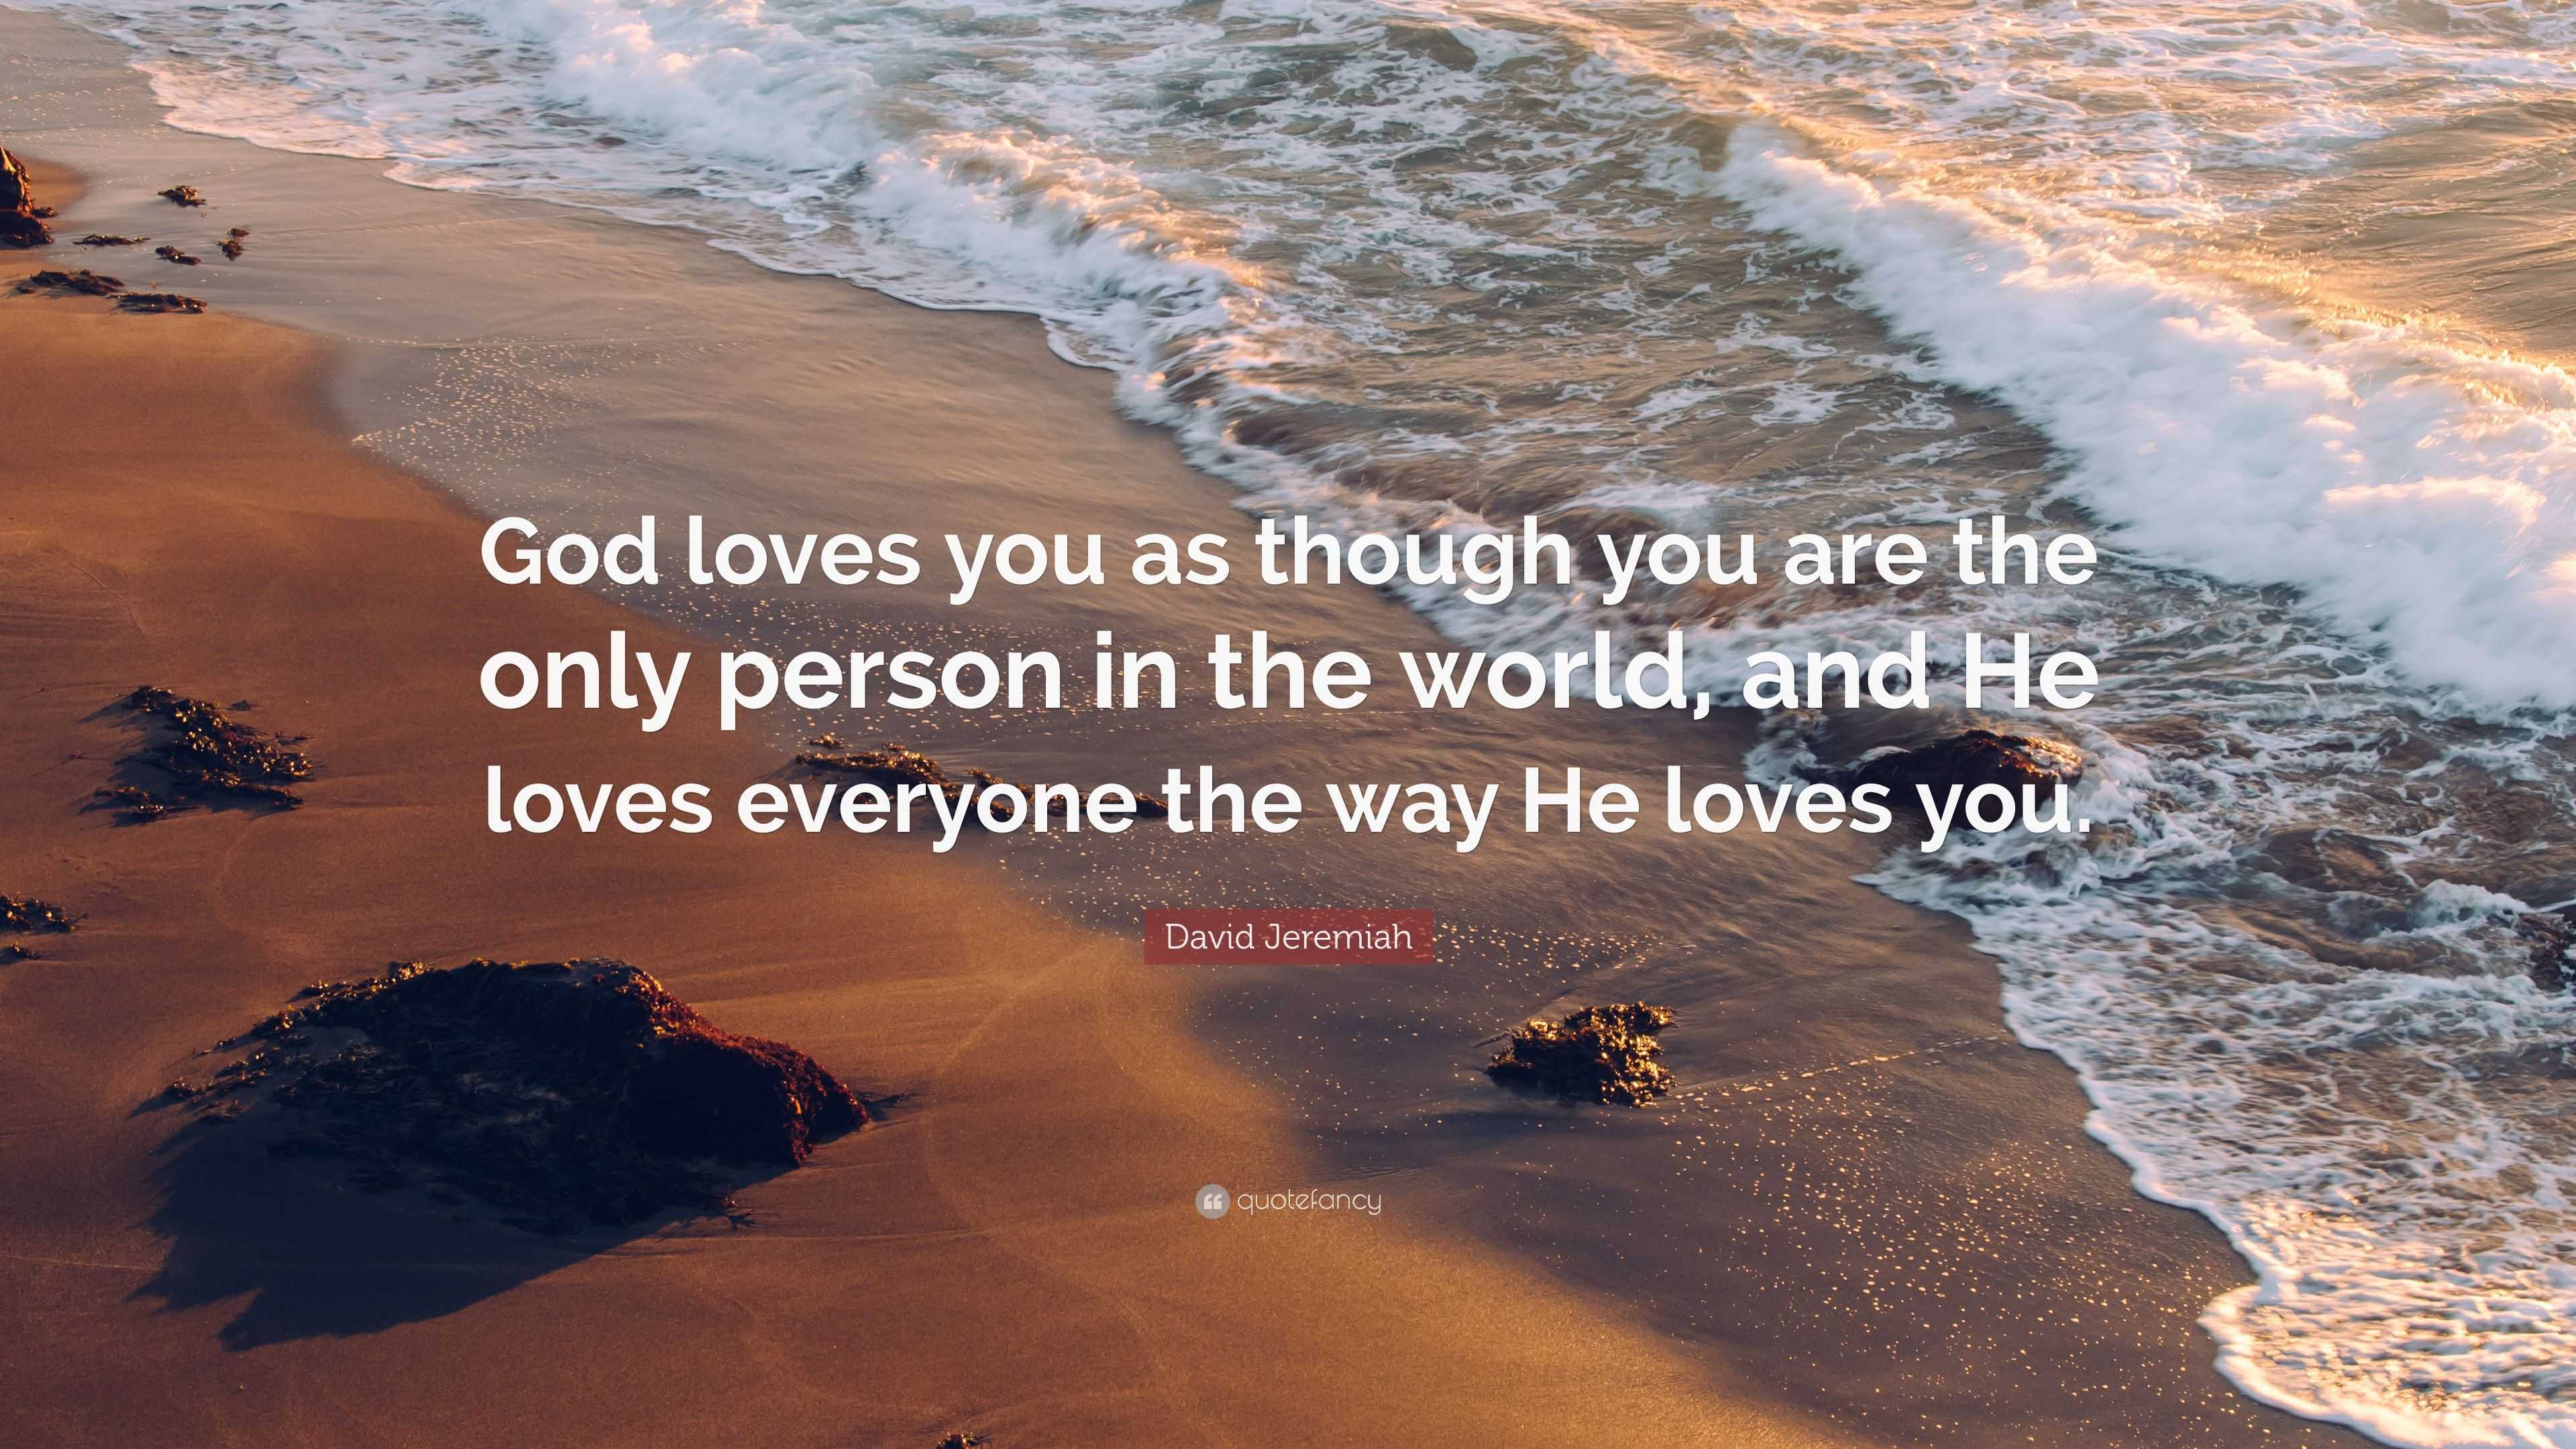 David Jeremiah Quote “God loves you as though you are the